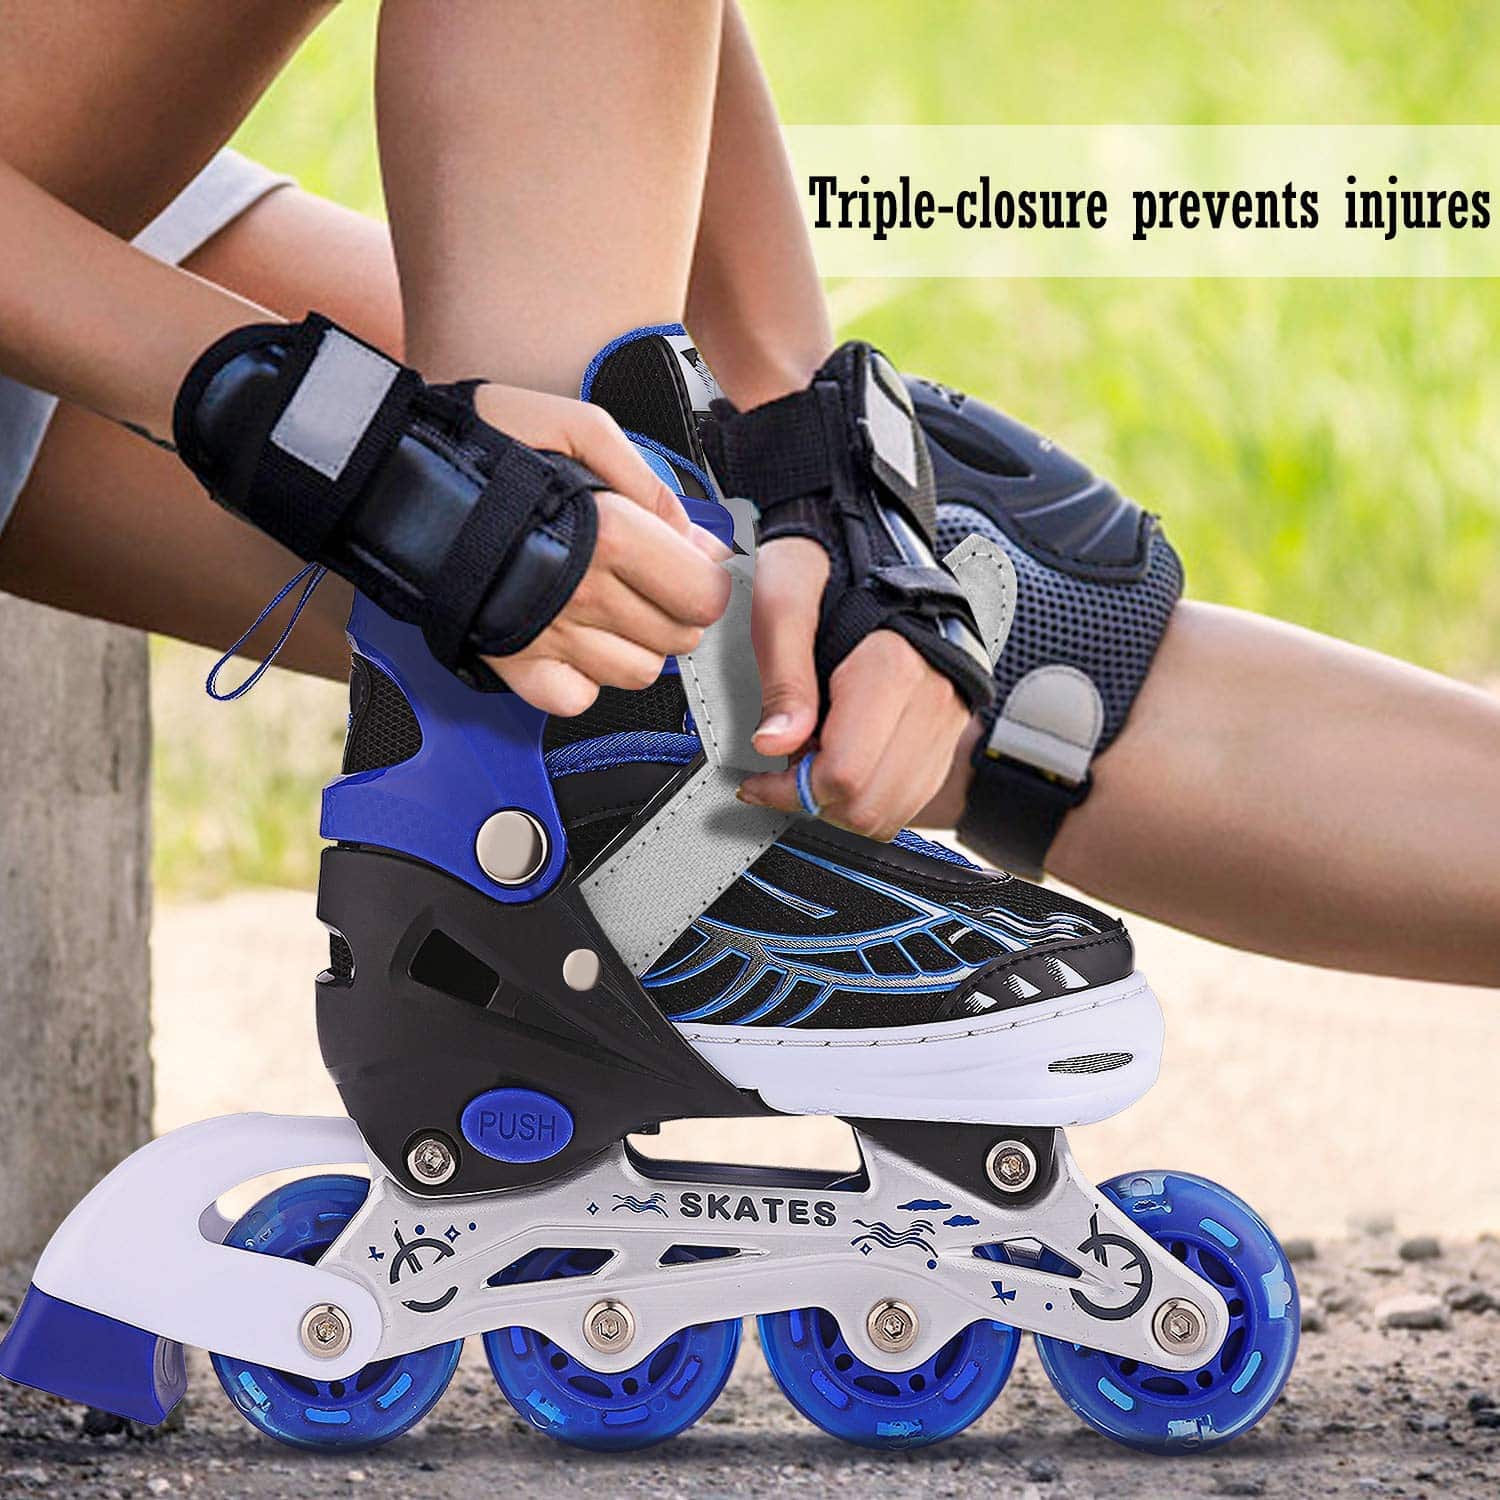 Top 10 Best Rollerblades for Boys in 2021 Reviews Buyer's Guide